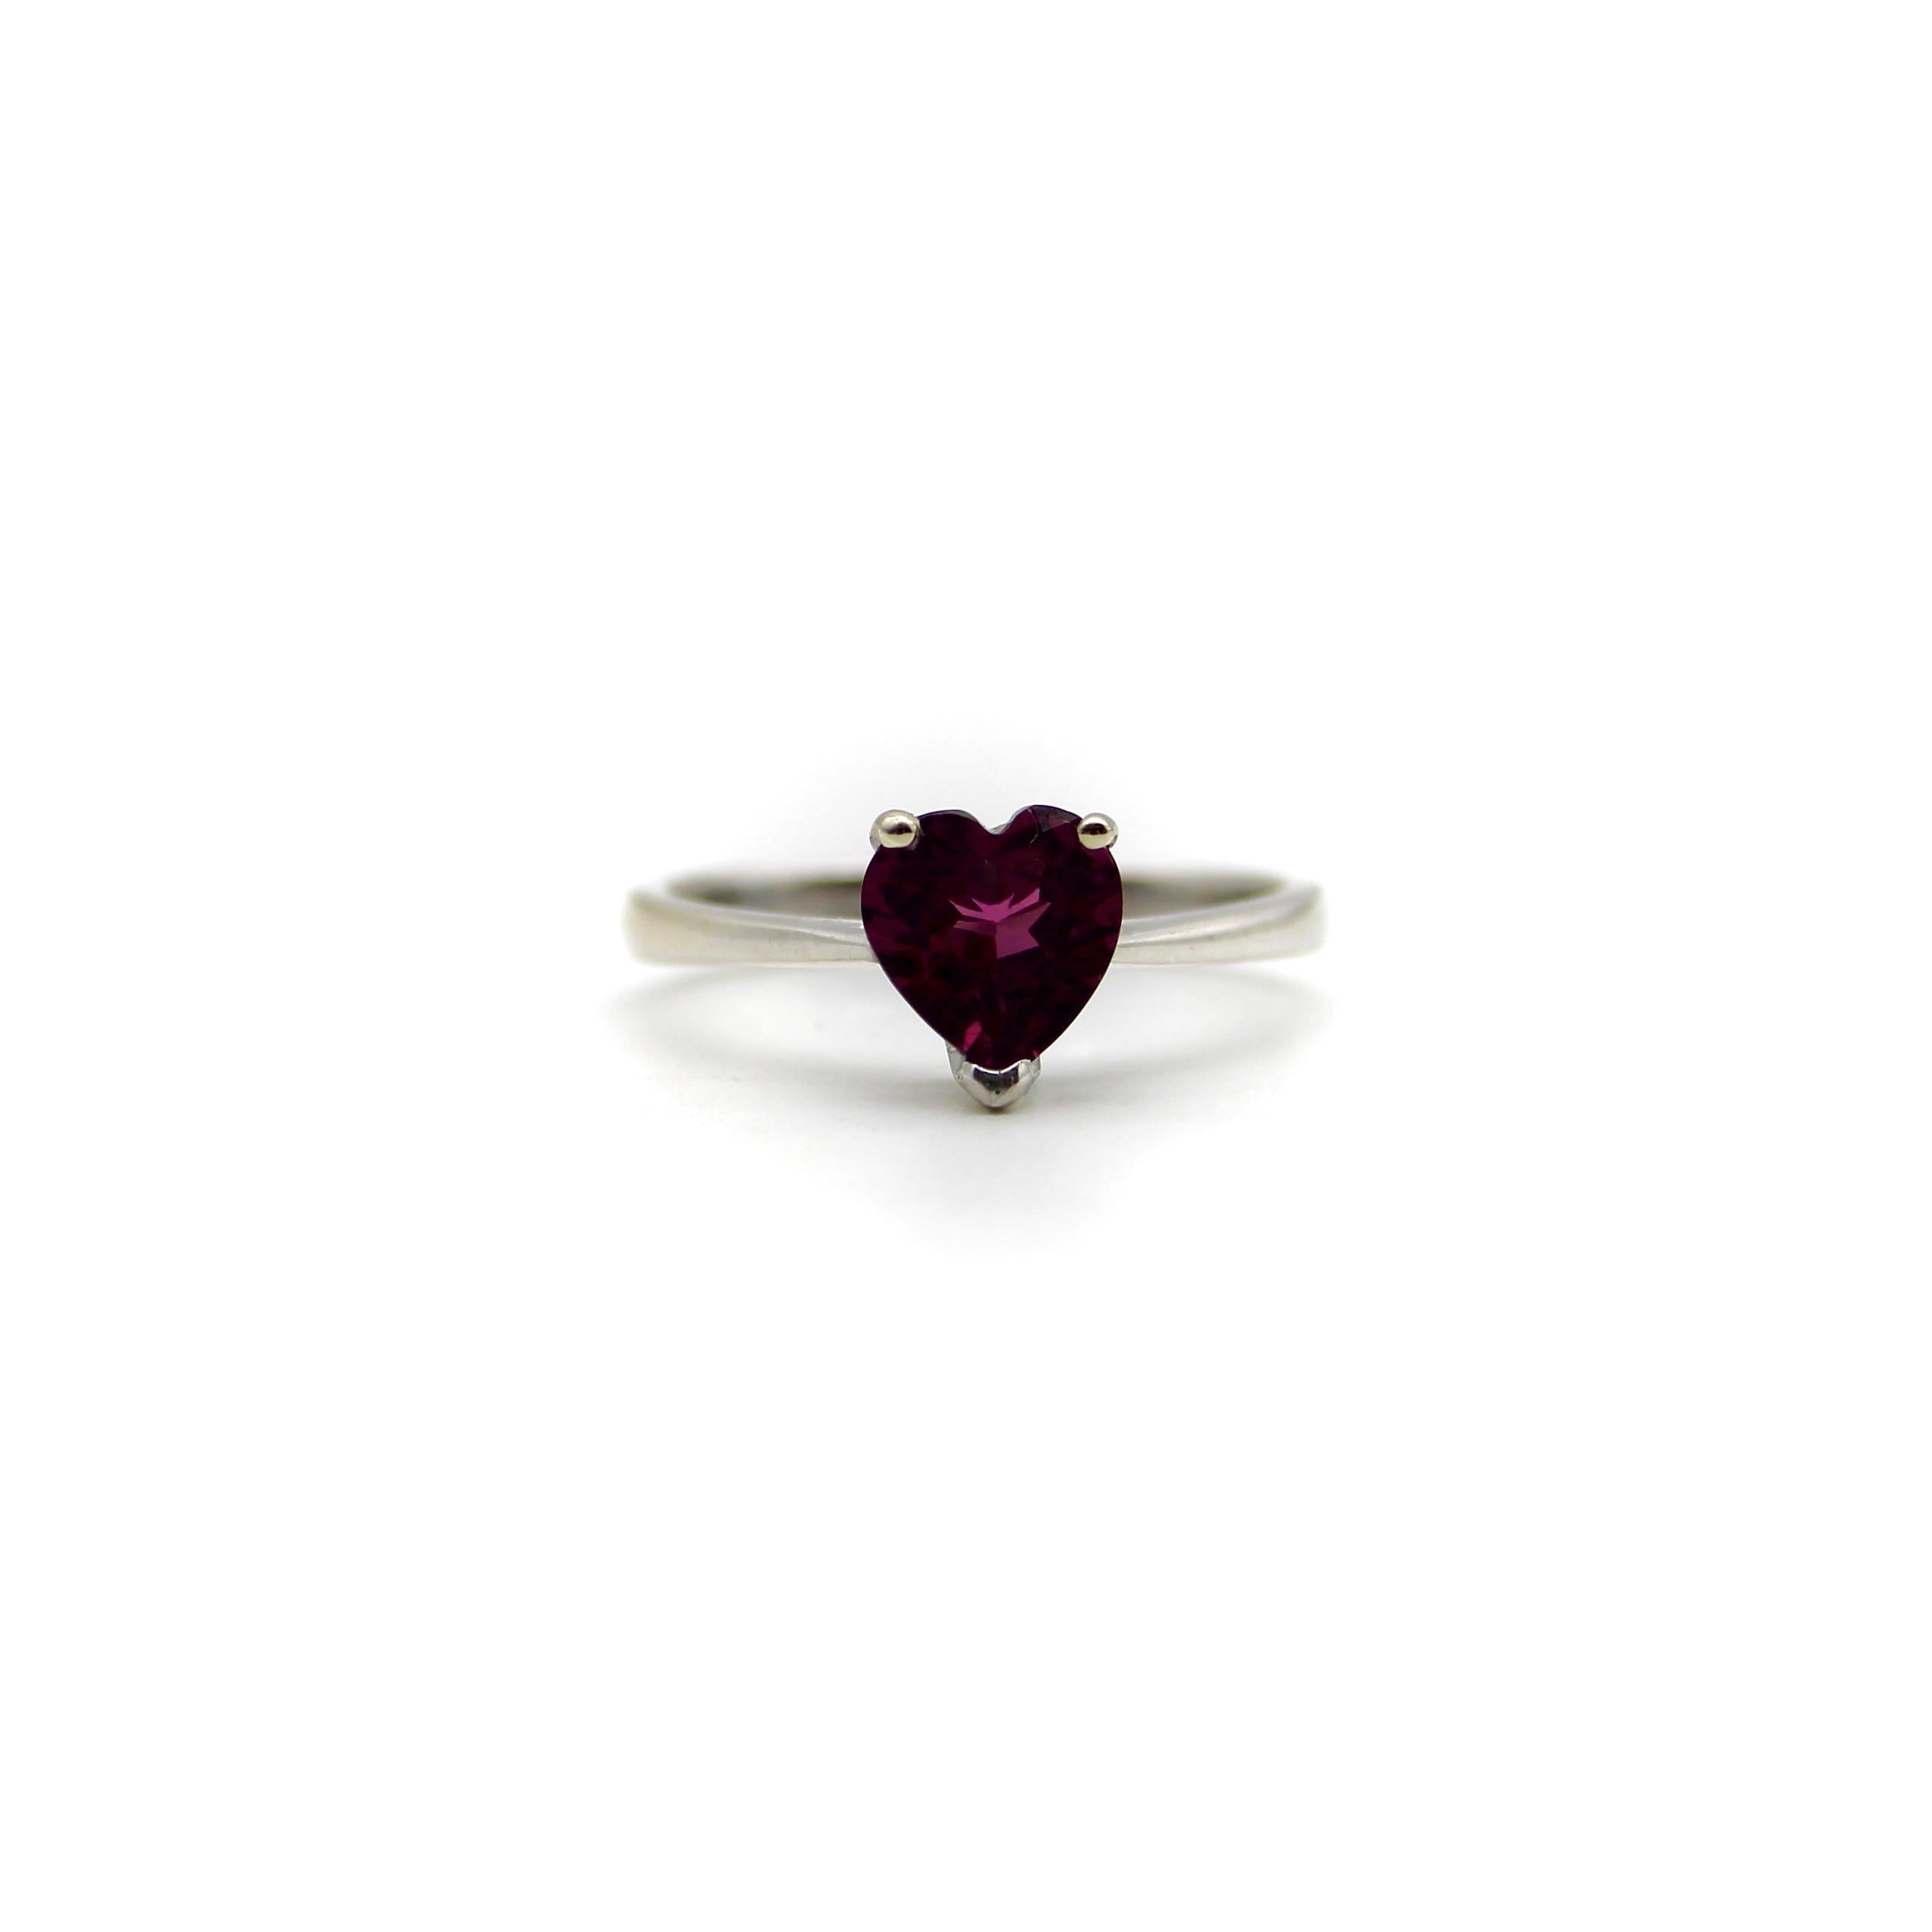 This 18k white gold ring features a beautifully colored heart-shaped garnet. The garnet is a saturated deep magenta, with facets that sparkle in many different hues of pink and red. It is prong set with three prongs; the back of the carriage or